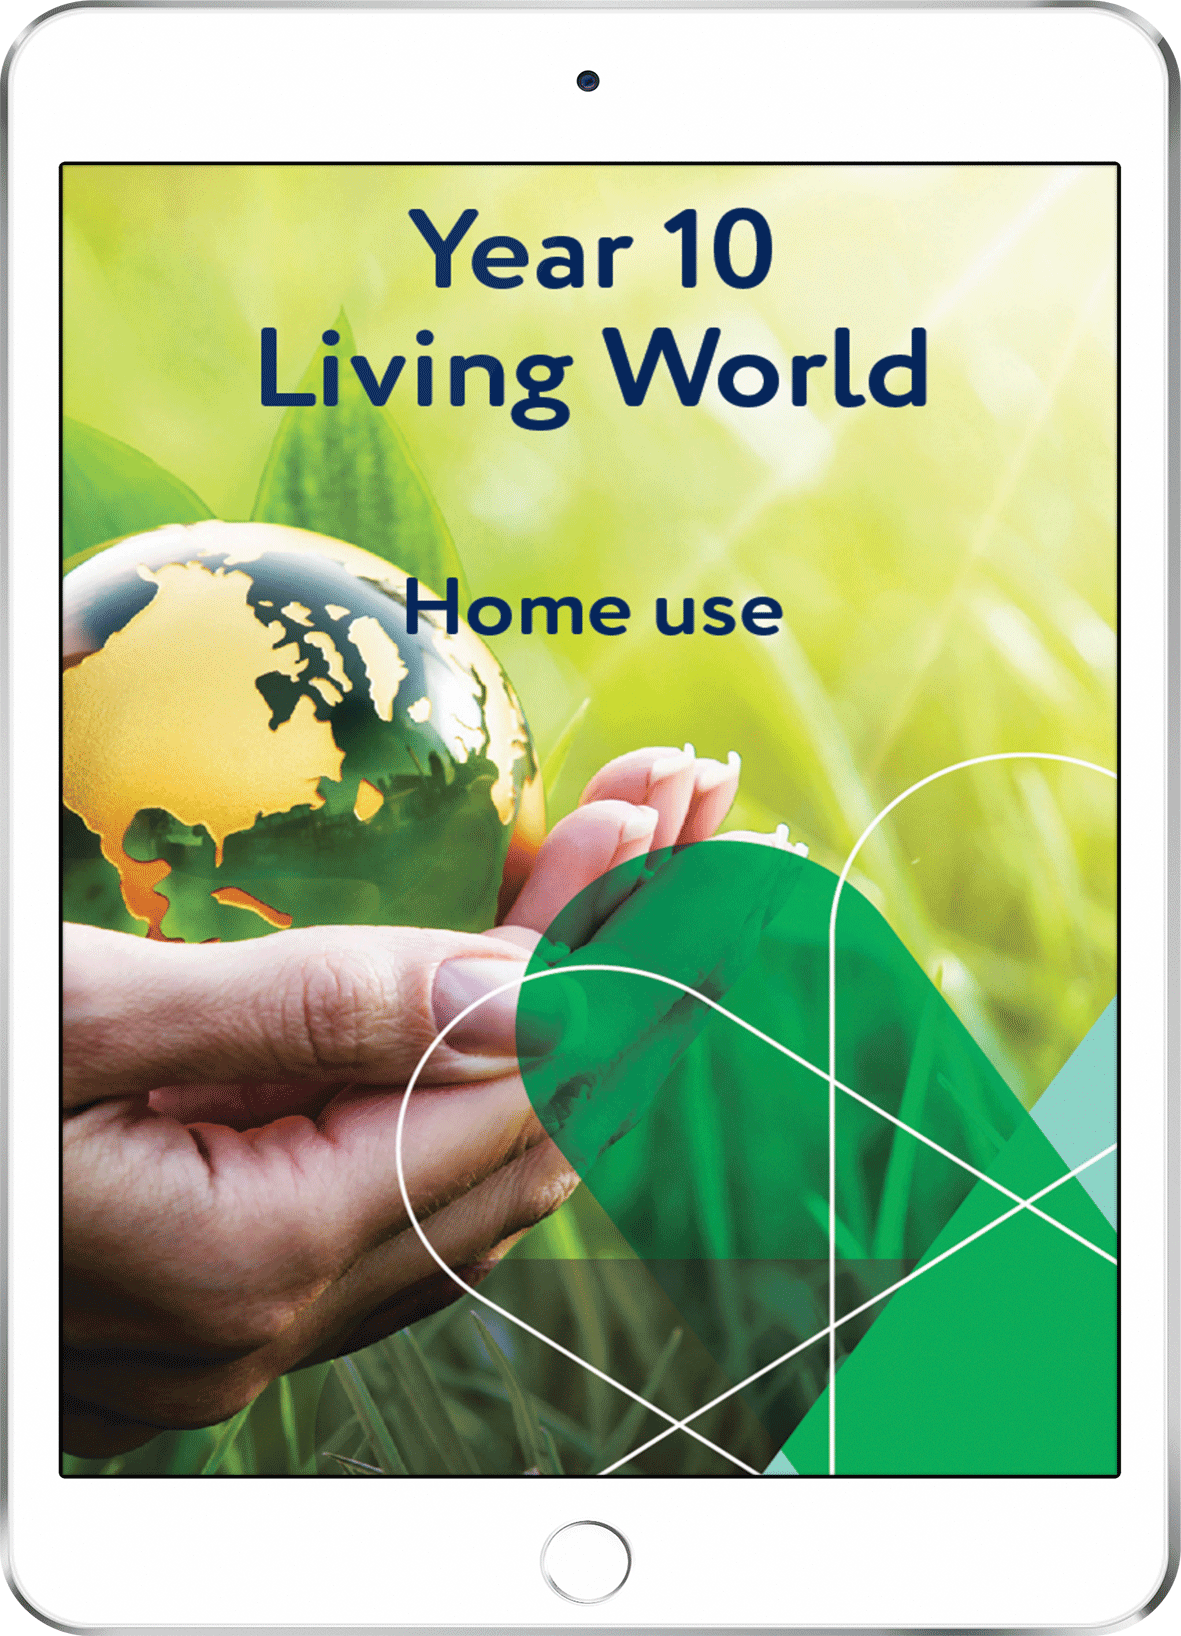 Year 10 Living World - Home Use